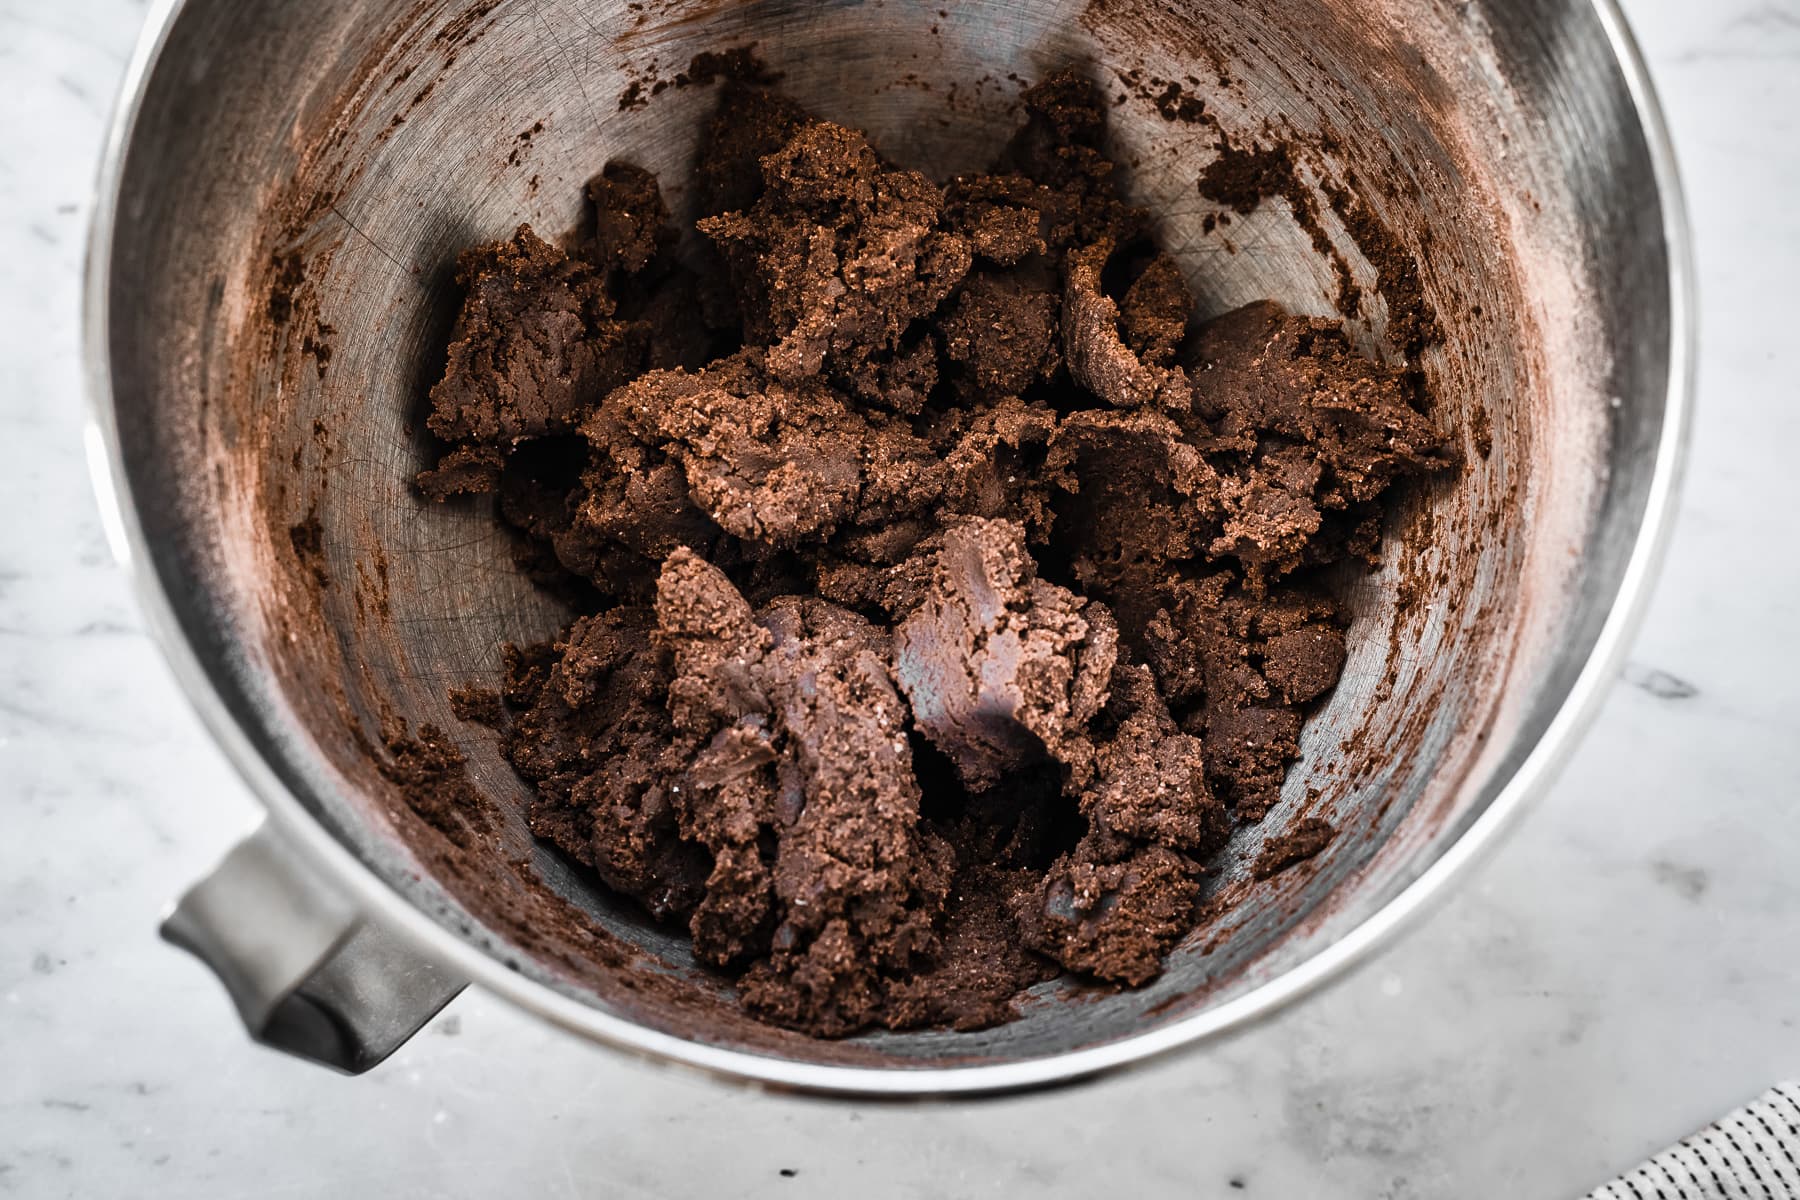 Process photo showing finished dough for chocolate wafer cookies in a metal mixing bowl on a marble surface.